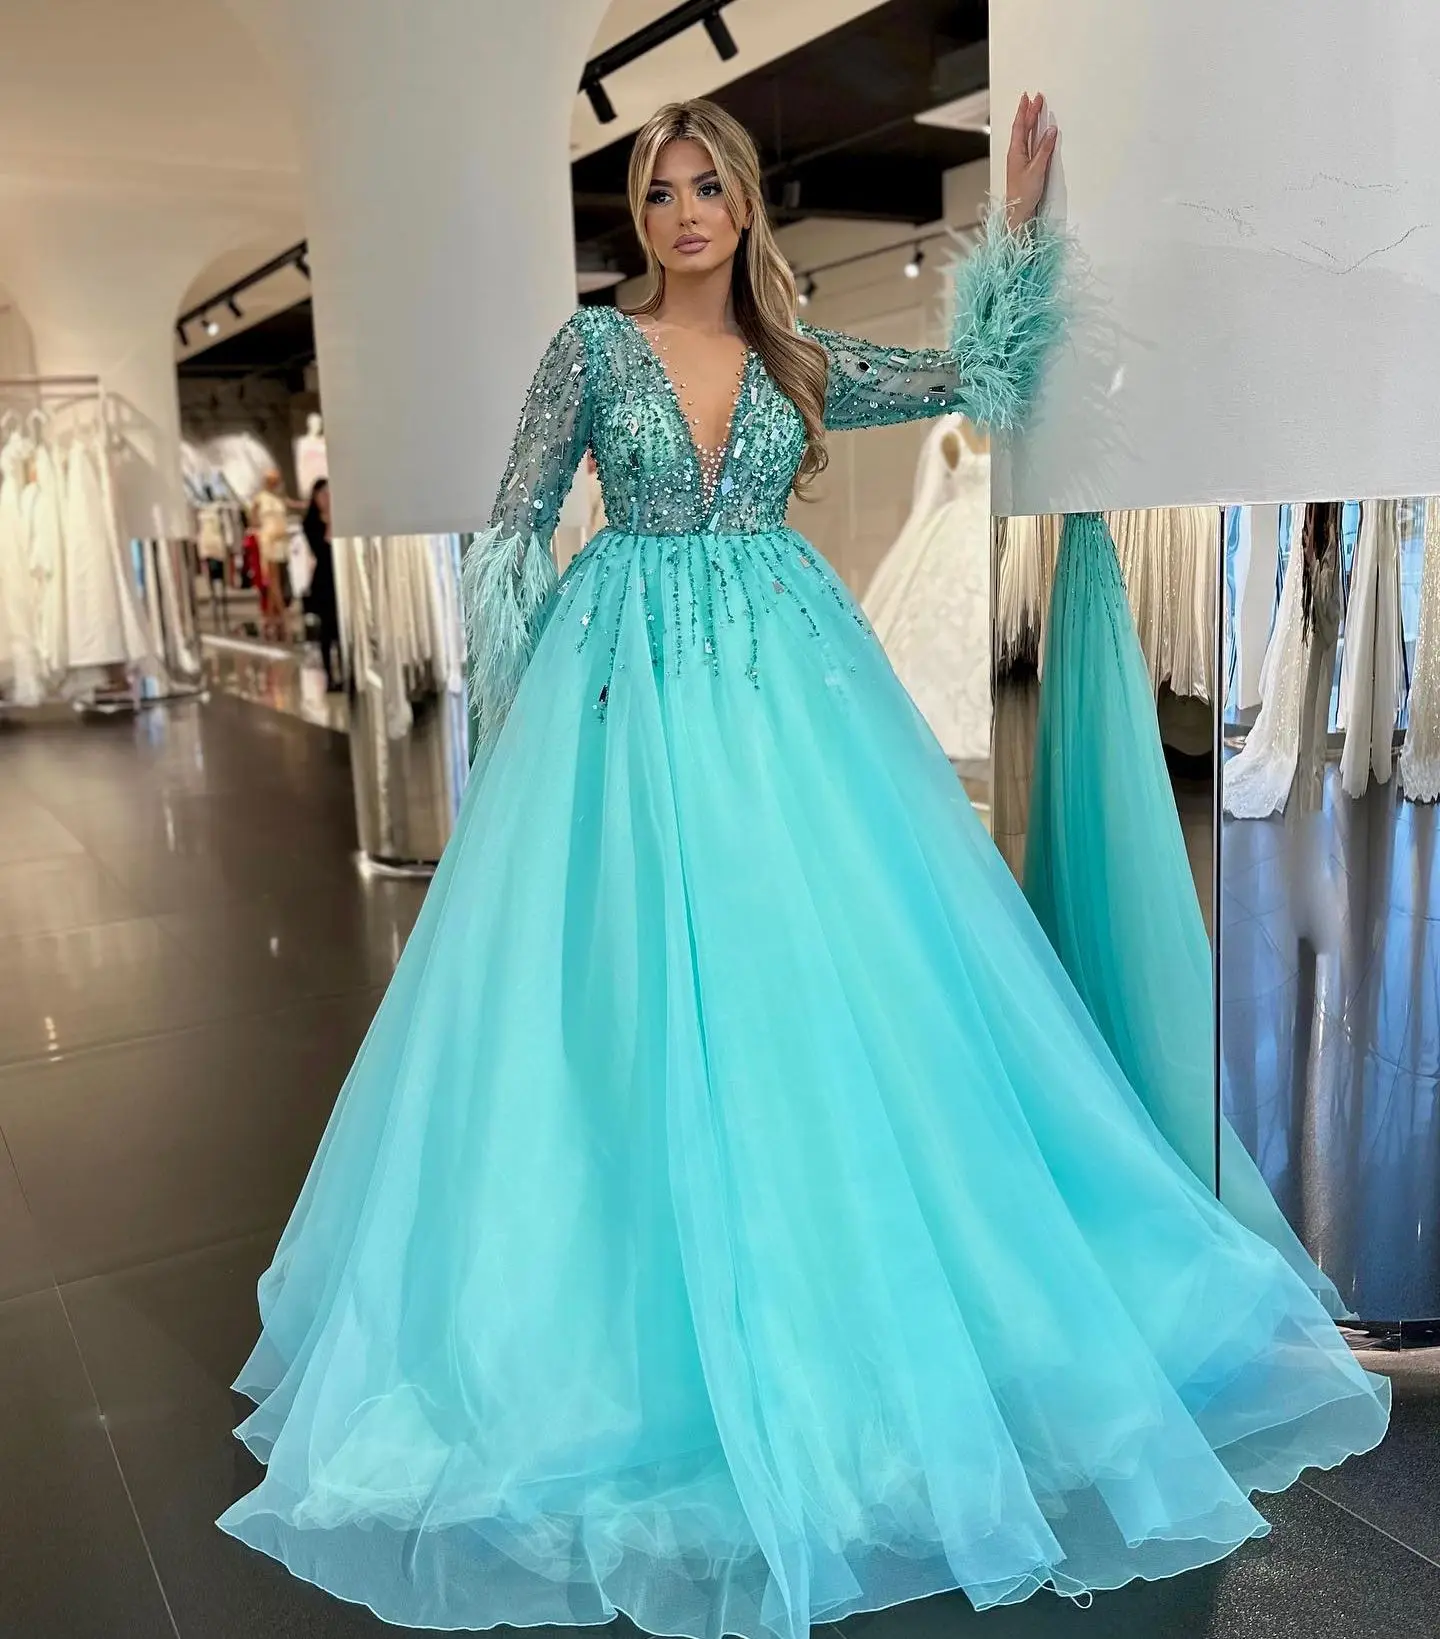 

Feather Beading Turquoise Prom Dresses Long Sleeve V Neck Party Dress Evening Gowns Tulle A Line Women Photos vestido de noche